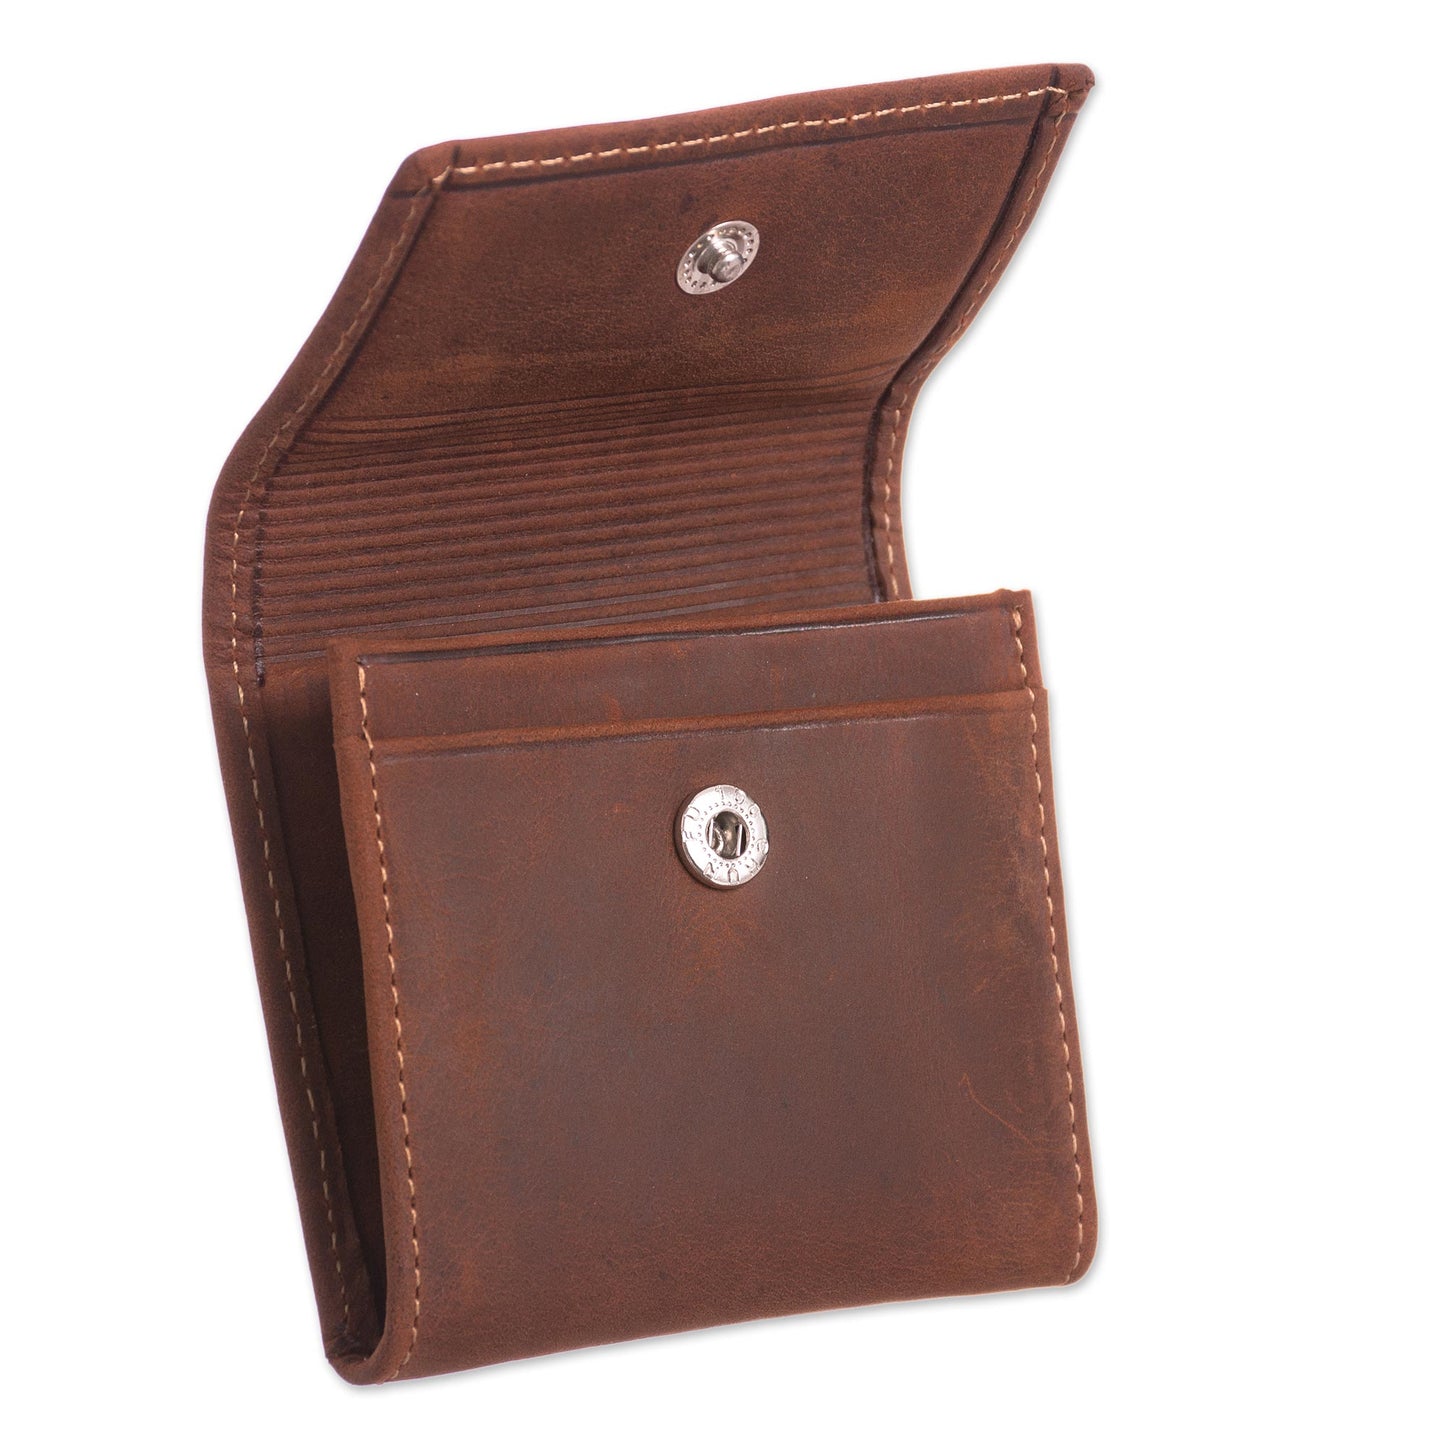 Esquire in Dark Brown Men's Two Compartment Dark Brown Leather Coin Wallet